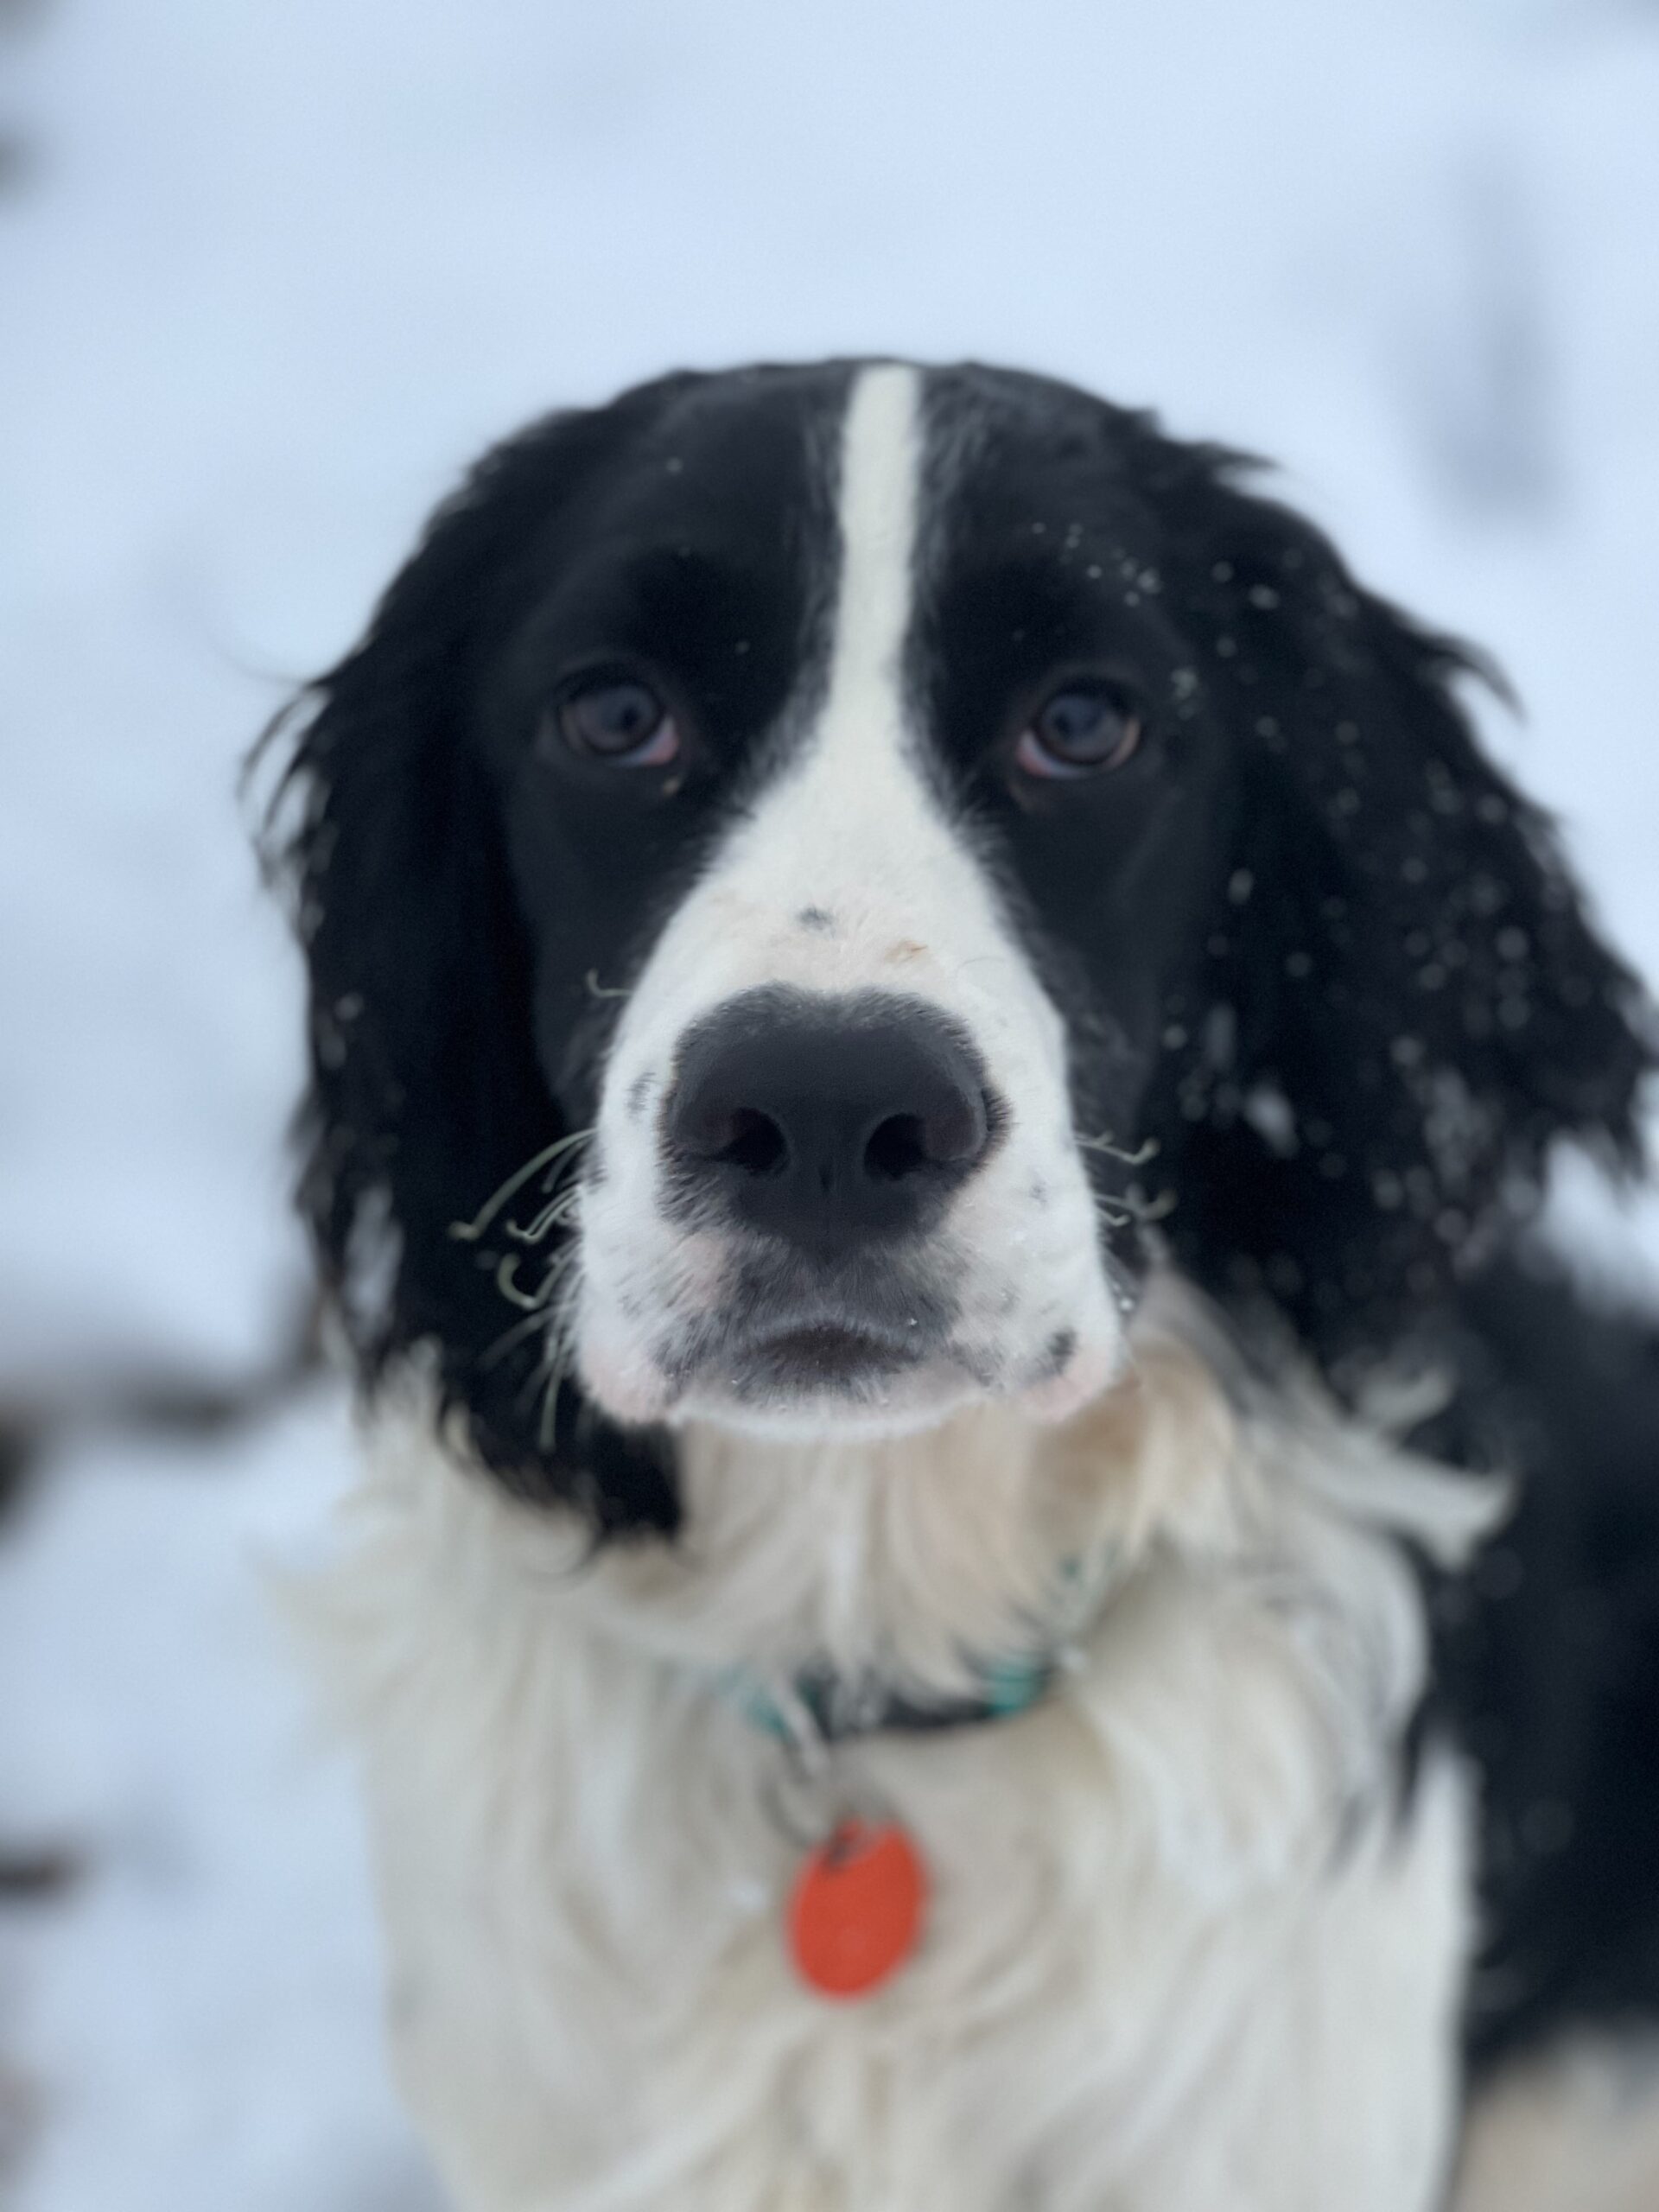 A female English Springer Spaniel with a solid white stripe down her nose poses for the camera.